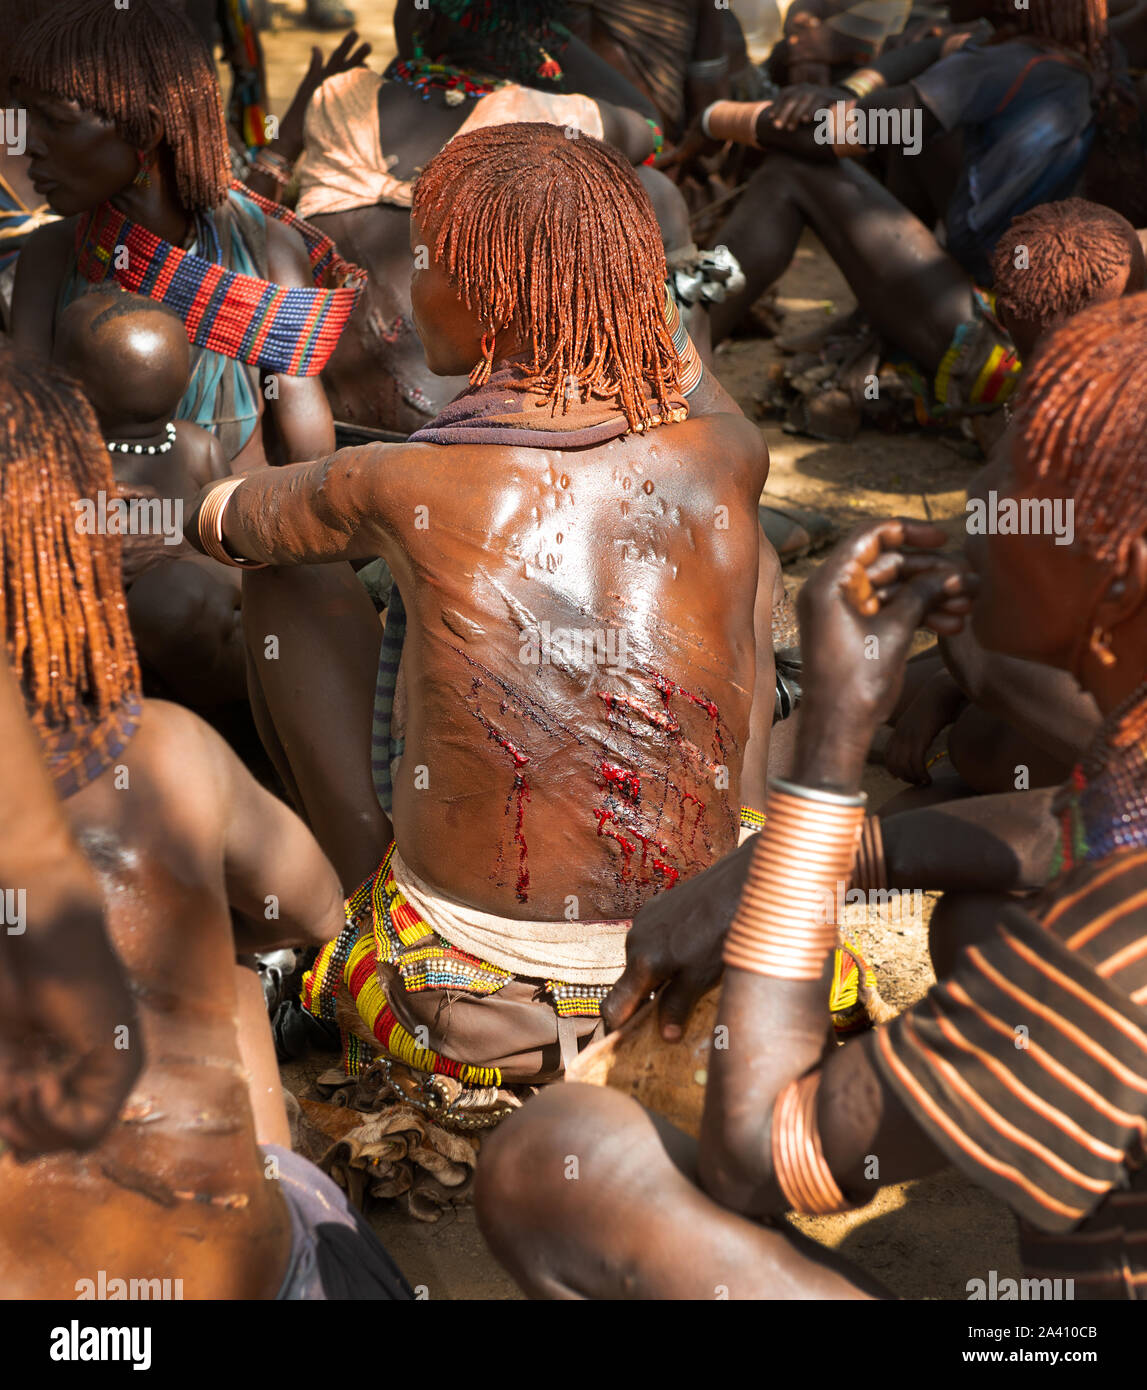 ETHIOPIA: Blood pours from the wounds of a recently whipped woman.  SHOCKING pictures show the strange customs of tribes in the Omo Valley where women Stock Photo